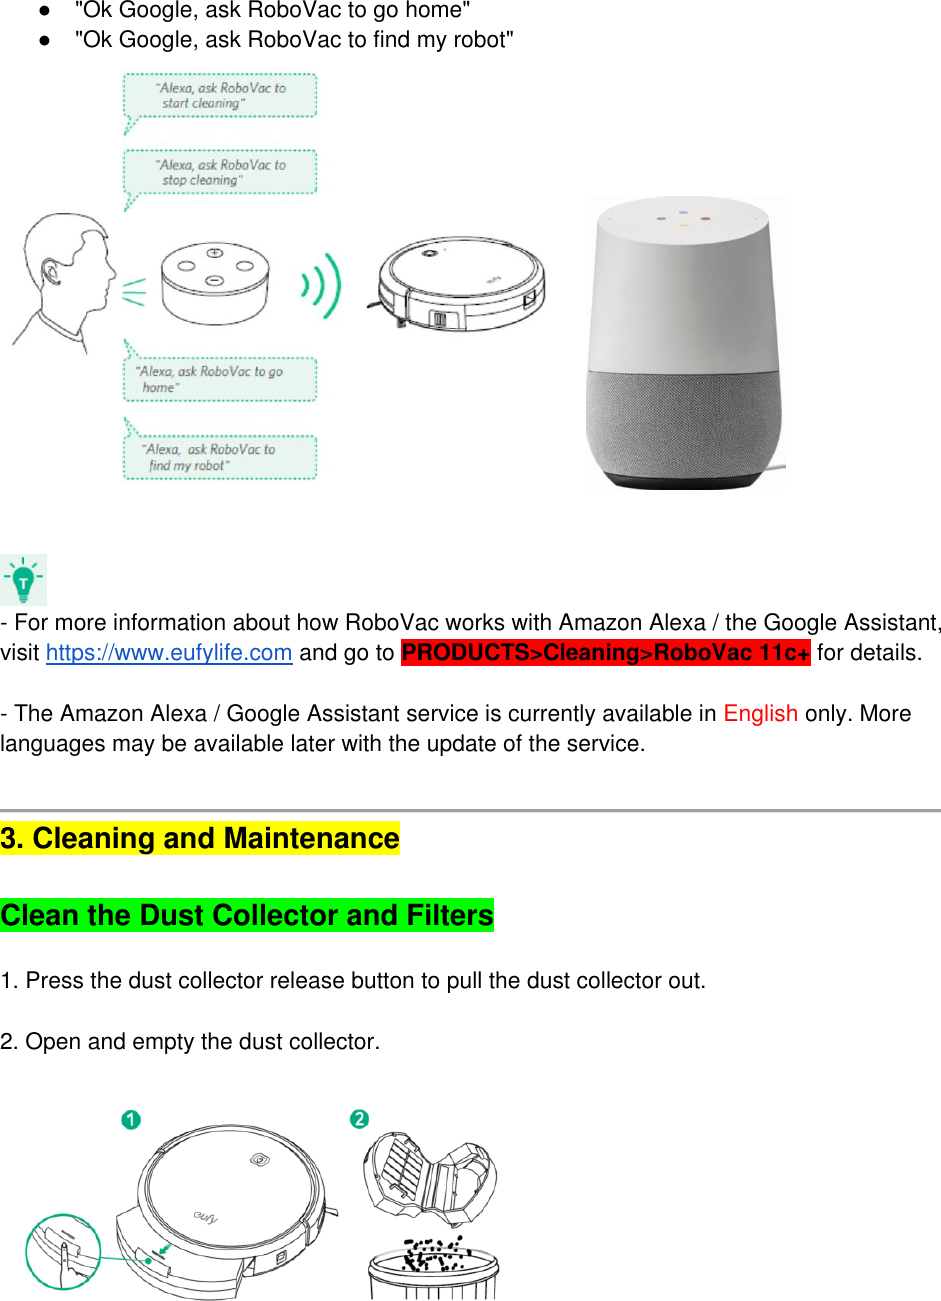 ●  &quot;Ok Google, ask RoboVac to go home&quot; ●  &quot;Ok Google, ask RoboVac to find my robot&quot;       - For more information about how RoboVac works with Amazon Alexa / the Google Assistant, visit https://www.eufylife.com and go to PRODUCTS&gt;Cleaning&gt;RoboVac 11c+ for details.   - The Amazon Alexa / Google Assistant service is currently available in English only. More languages may be available later with the update of the service.    3. Cleaning and Maintenance   Clean the Dust Collector and Filters  1. Press the dust collector release button to pull the dust collector out.   2. Open and empty the dust collector.      